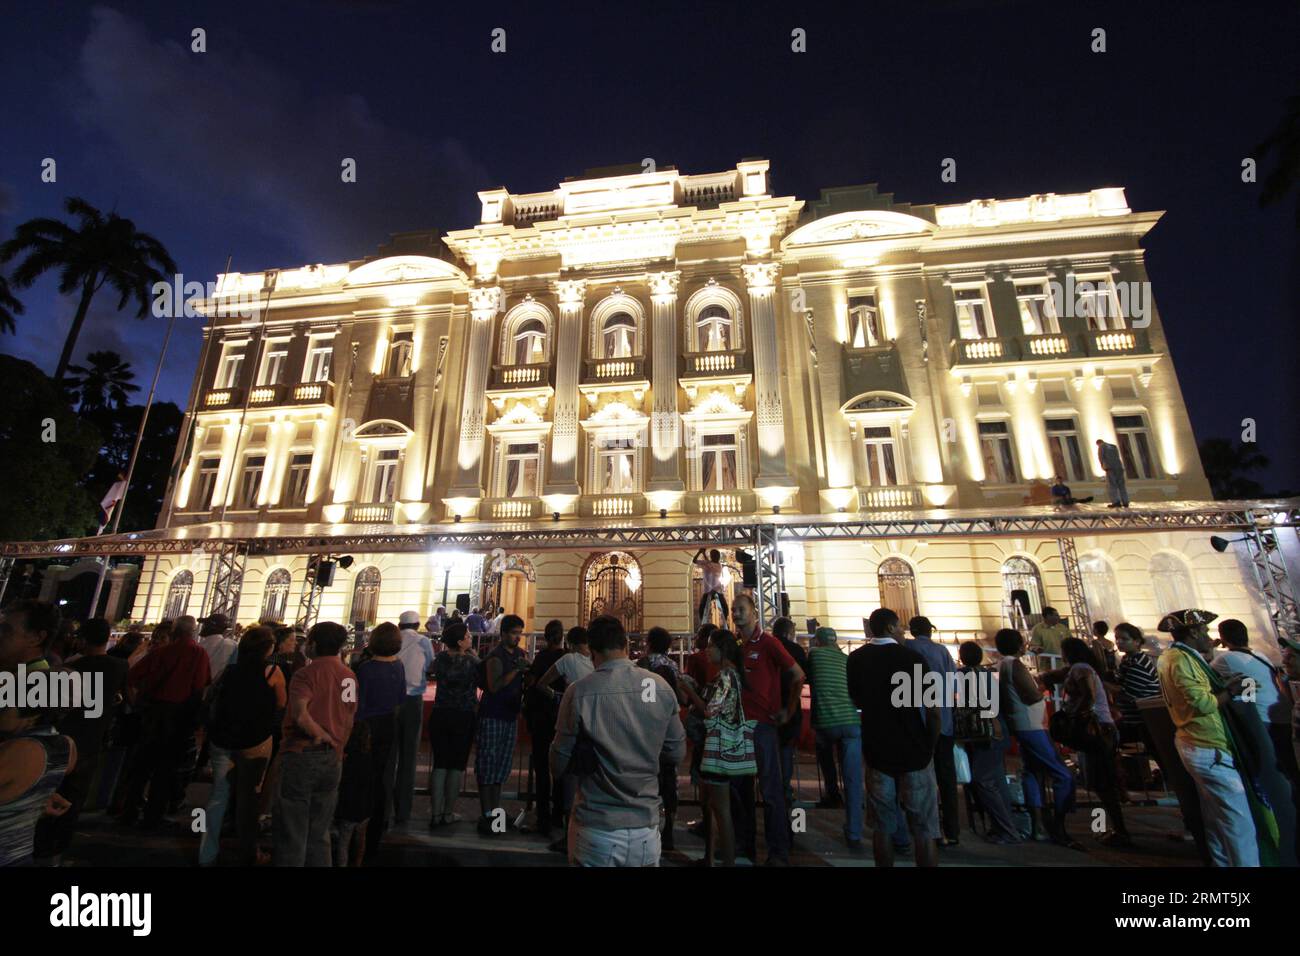 (140817) -- RECIFE,  -- People stand in front of Palacio do Campo das Princesas, in the city of Recife, Brazil, on Aug. 16, 2014. According to local press, the funeral of the late presidential candidate Eduardo Campos, will be held at Palacio do Campo das Princesas. The presidential candidate, 49 years old, and third in the national polls for the elections of October 5, died along with six other people when the Cessna 560XL crashed 75km from Sao Paulo. Diego Nicro/AGENCIA ESTADO) (lyi) BRAZIL OUT BRAZIL-RECIFE-POLITICS-EDUARDO CAMPOS e AGENCIAxESTADO PUBLICATIONxNOTxINxCHN   Recife Celebrities Stock Photo